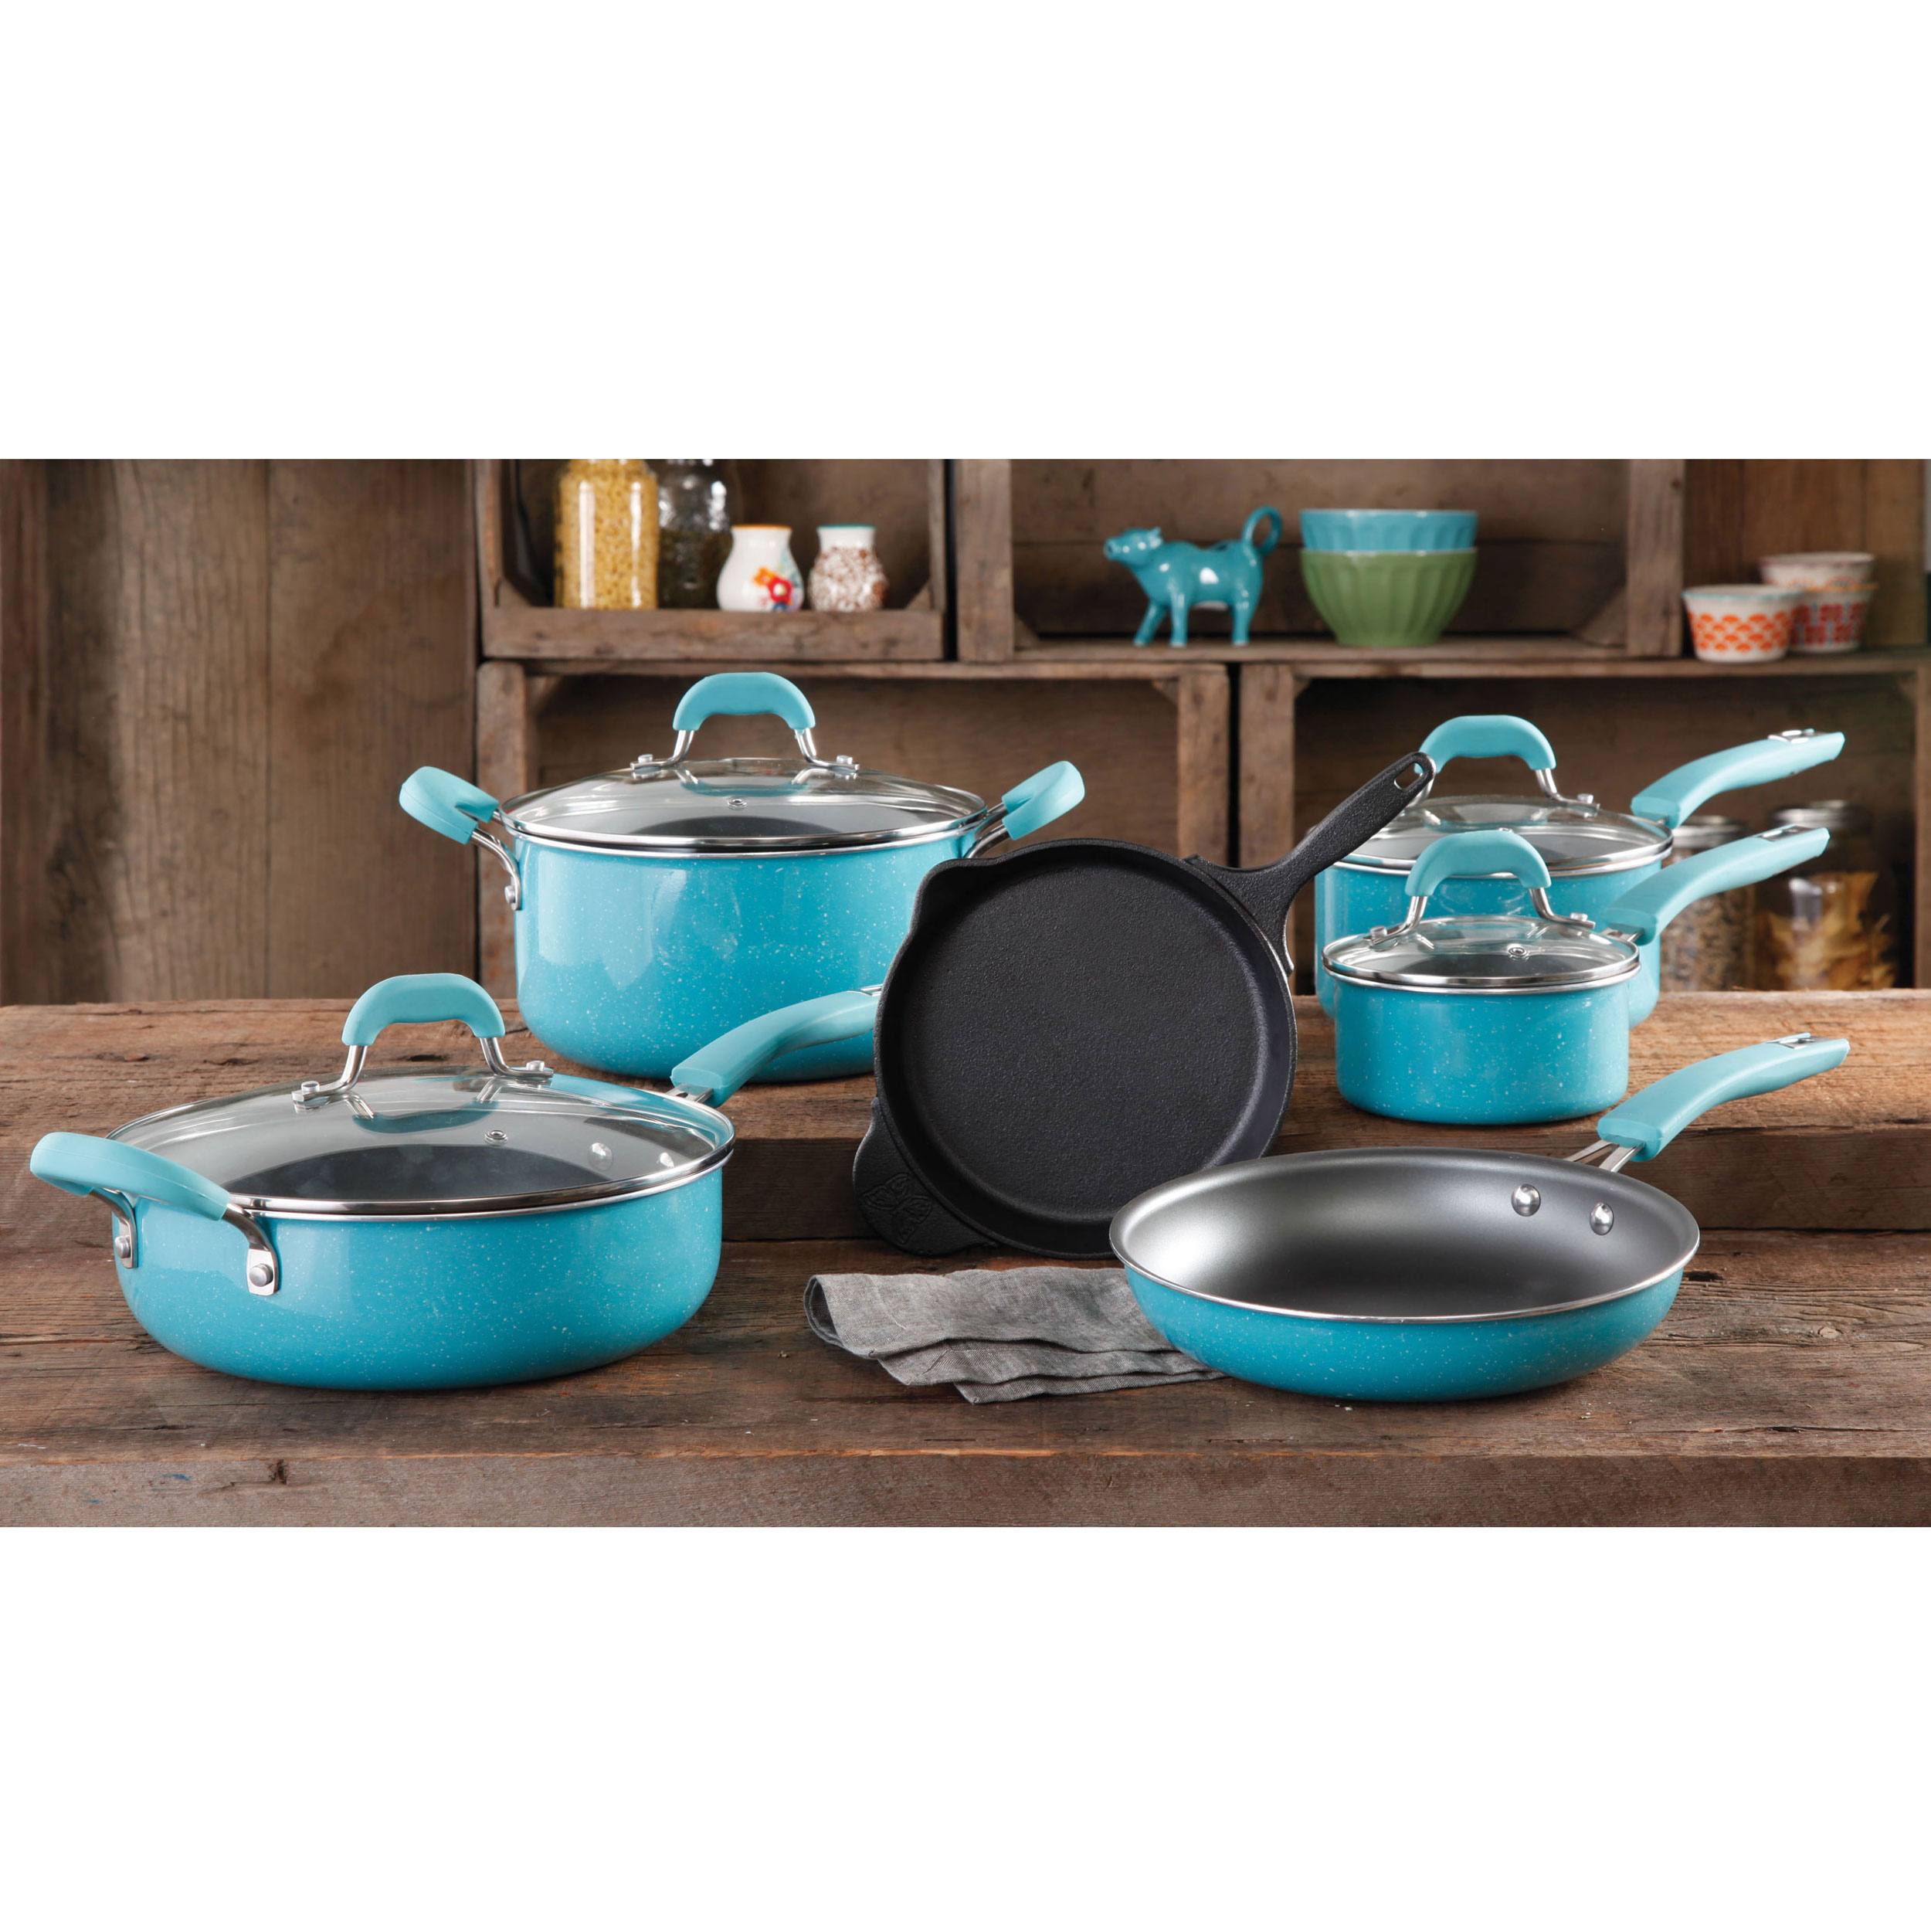 The Pioneer Woman Vintage Speckle & Cast Iron 10-Piece Non-Stick Cookware Set, Turquoise - image 1 of 10